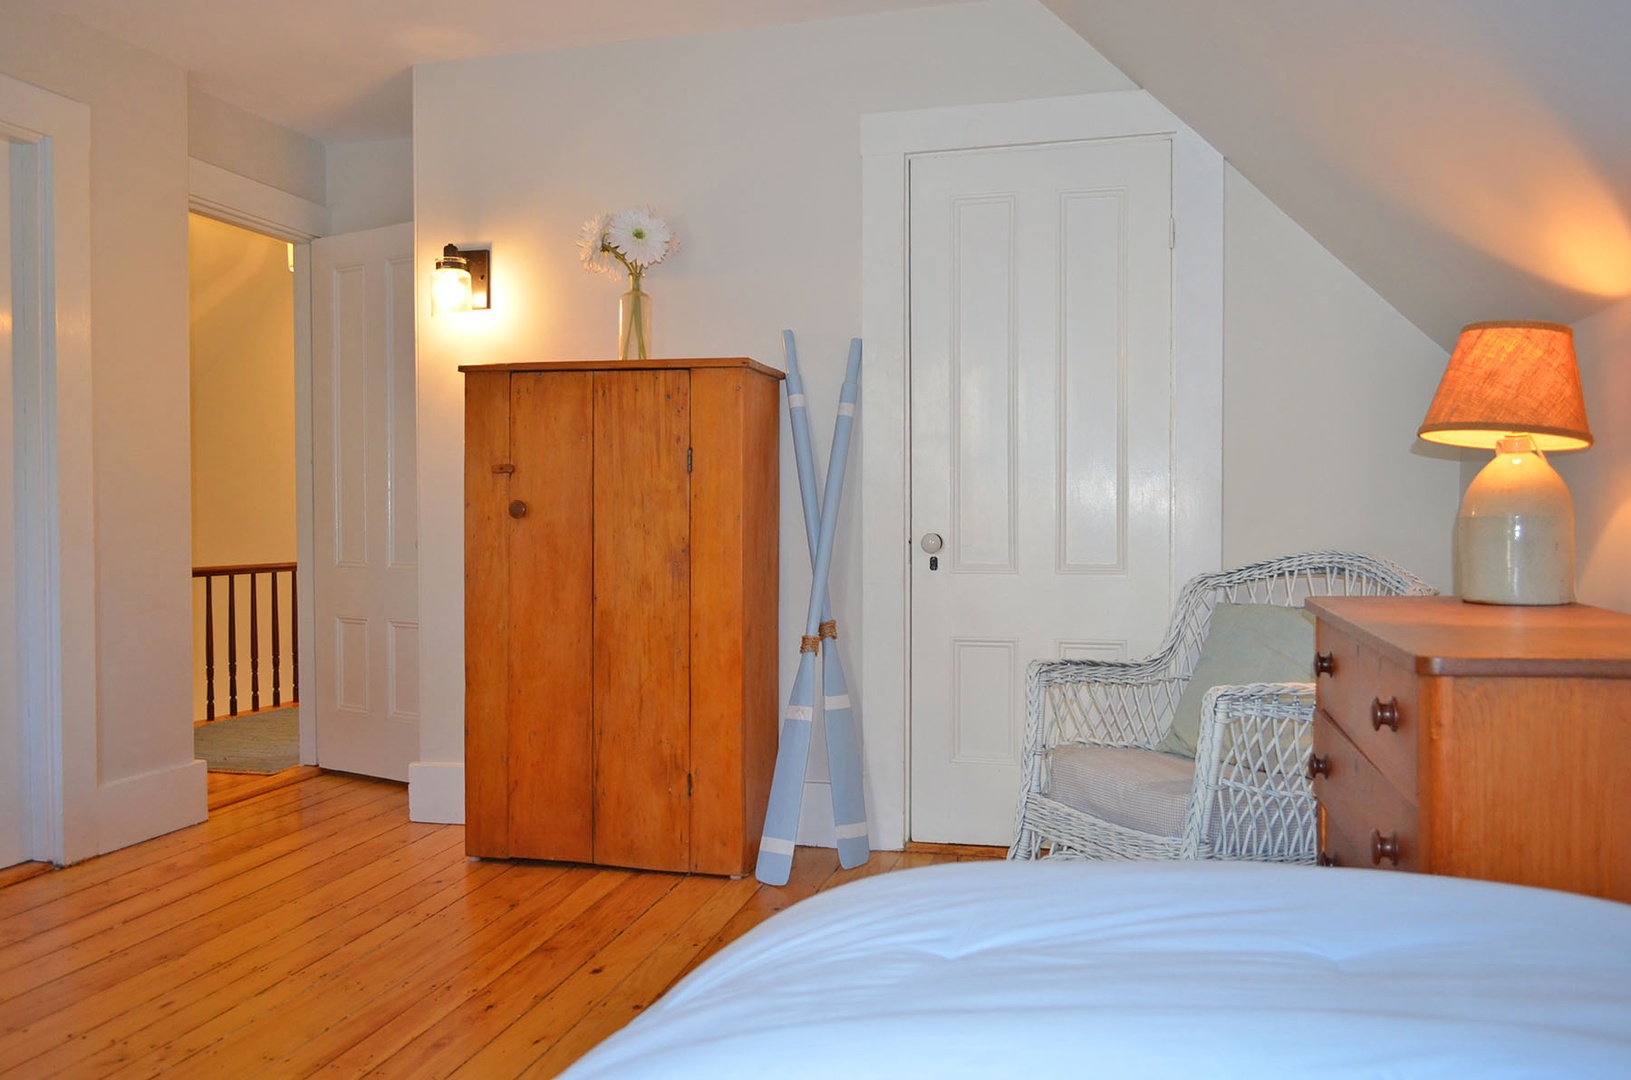 View of the Twin bedroom featuring beautiful hardwood floors.